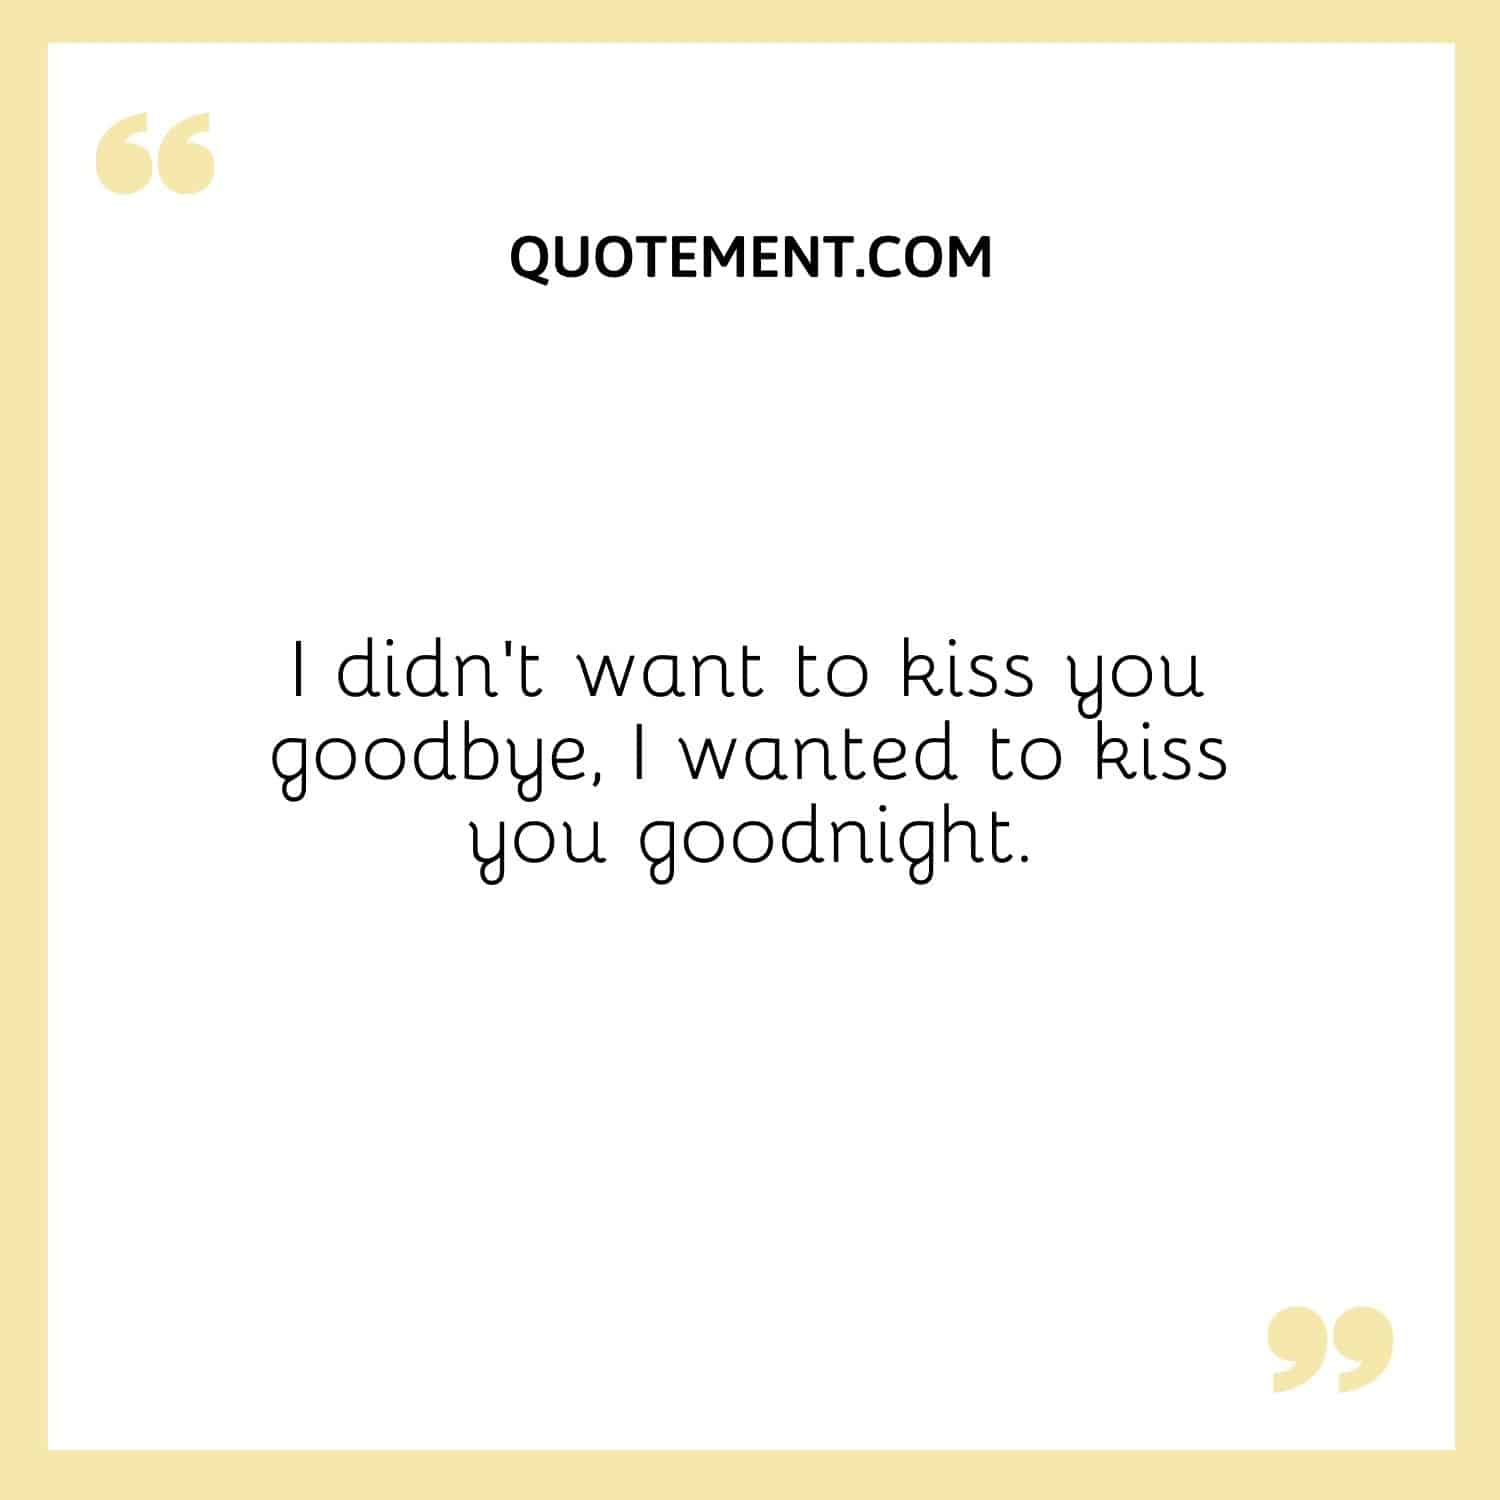 I didn’t want to kiss you goodbye, I wanted to kiss you goodnight